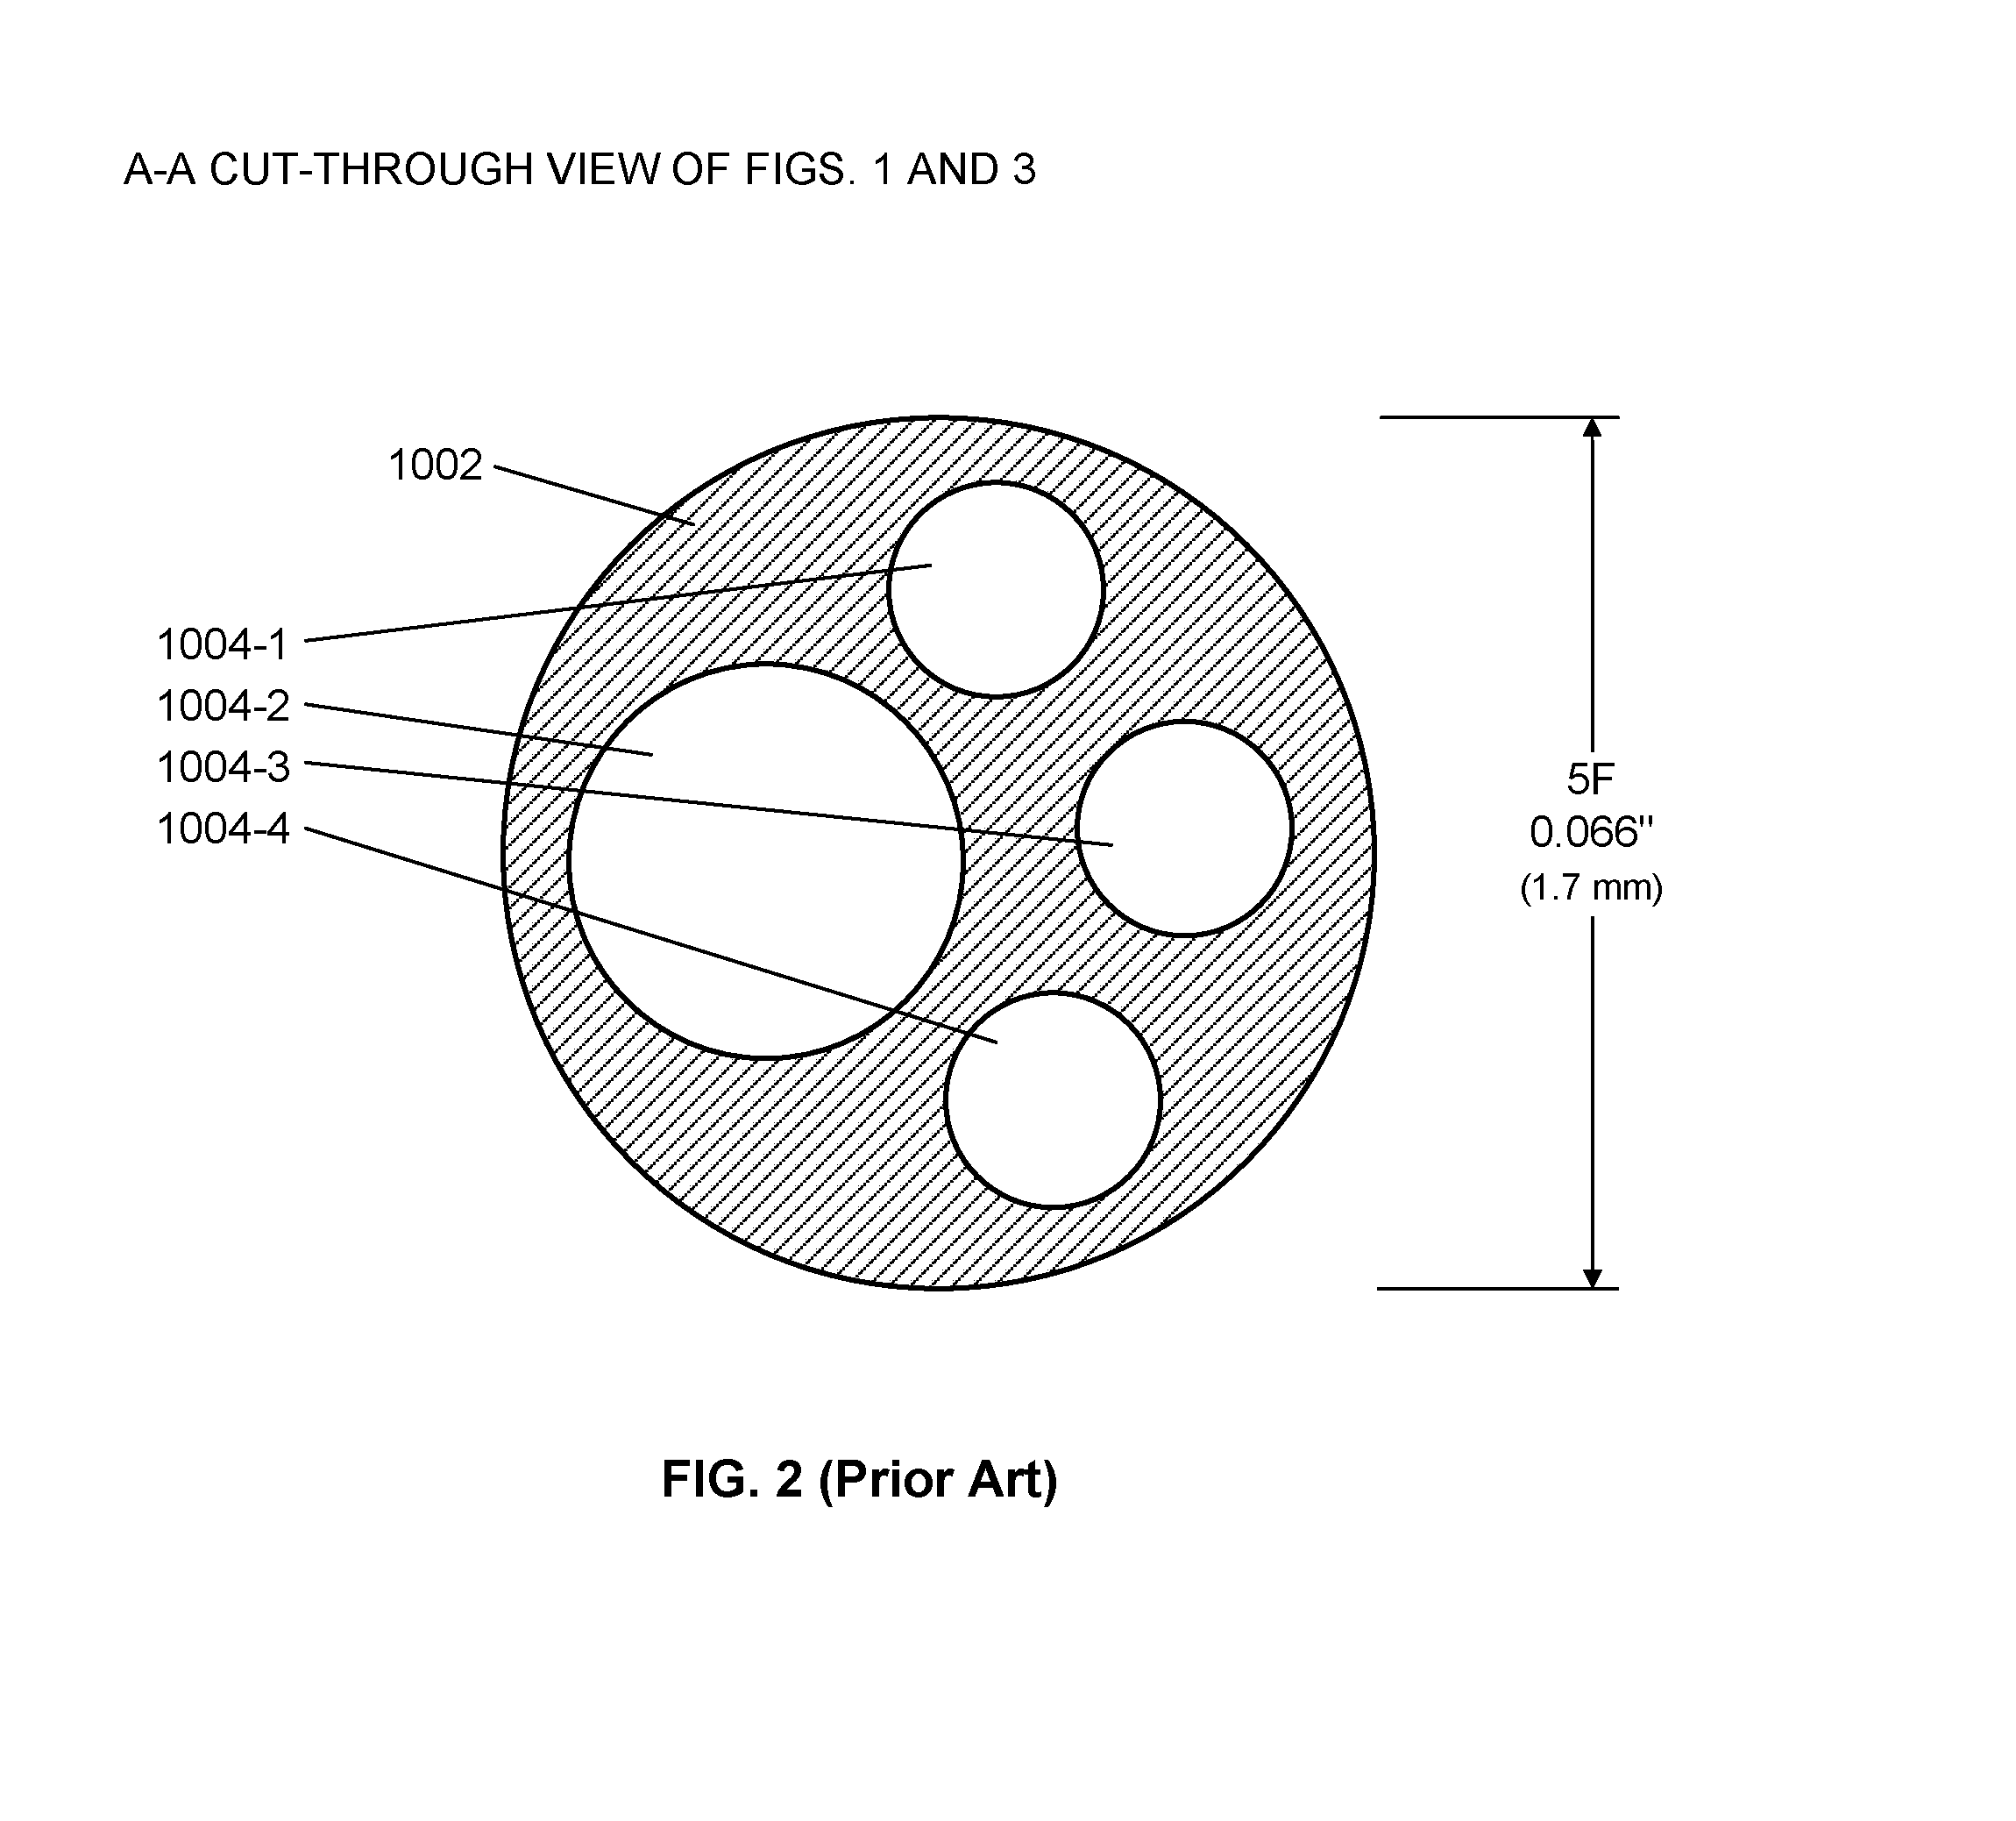 System and apparatus comprising a multi-sensor catheter for right heart and pulmonary artery catheterization